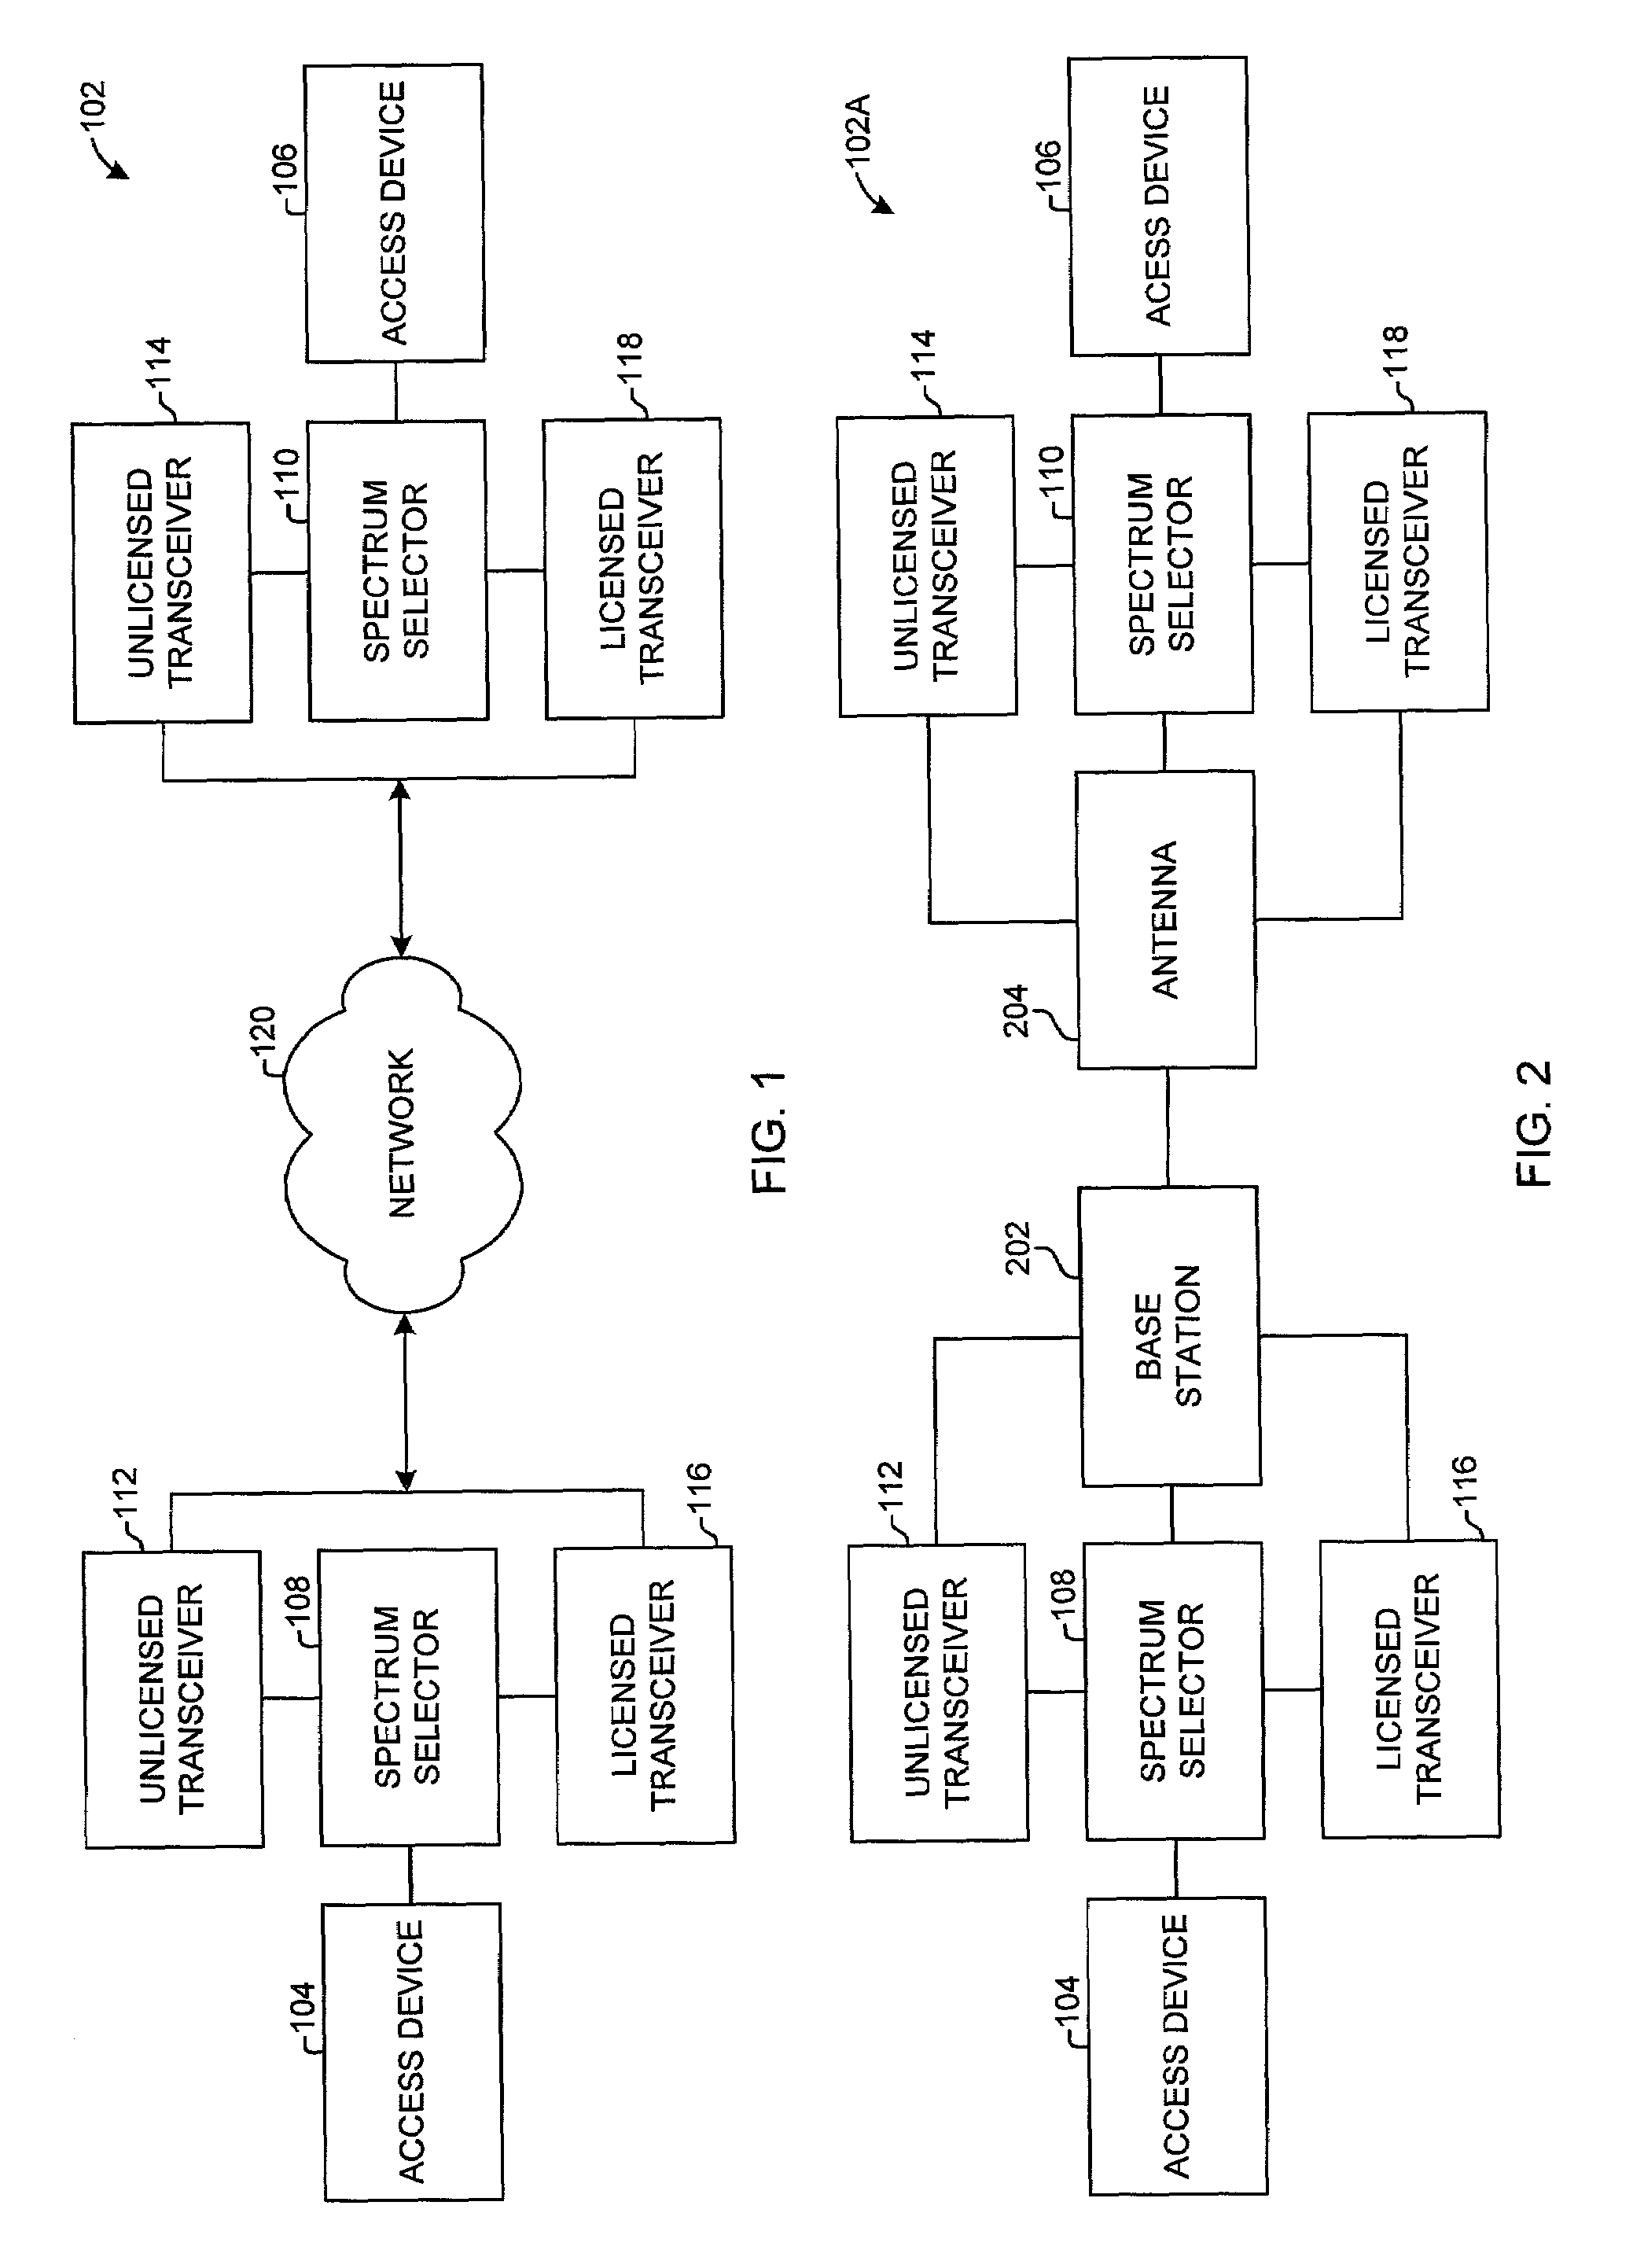 System and method for selecting spectrum